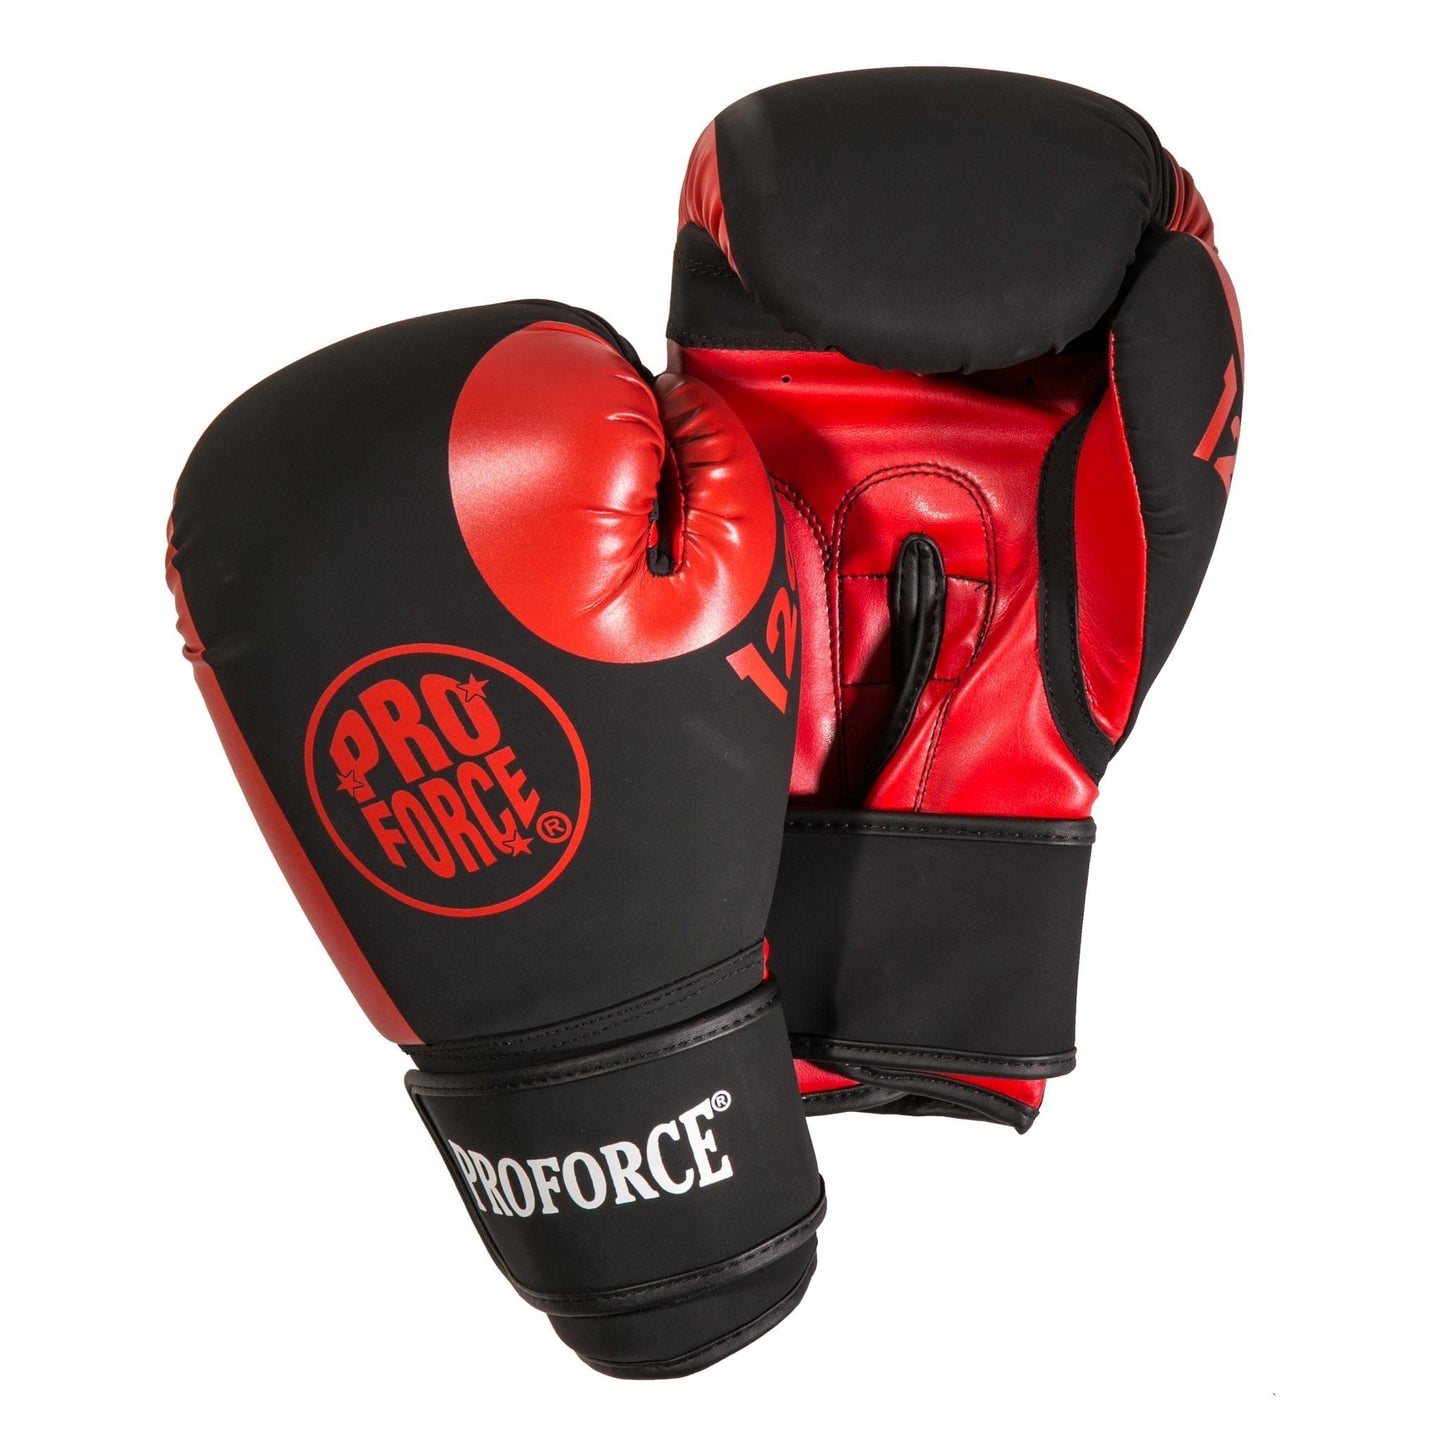 ProForce Boxing black/red ProForce Tactical Boxing Training Glove - 12oz